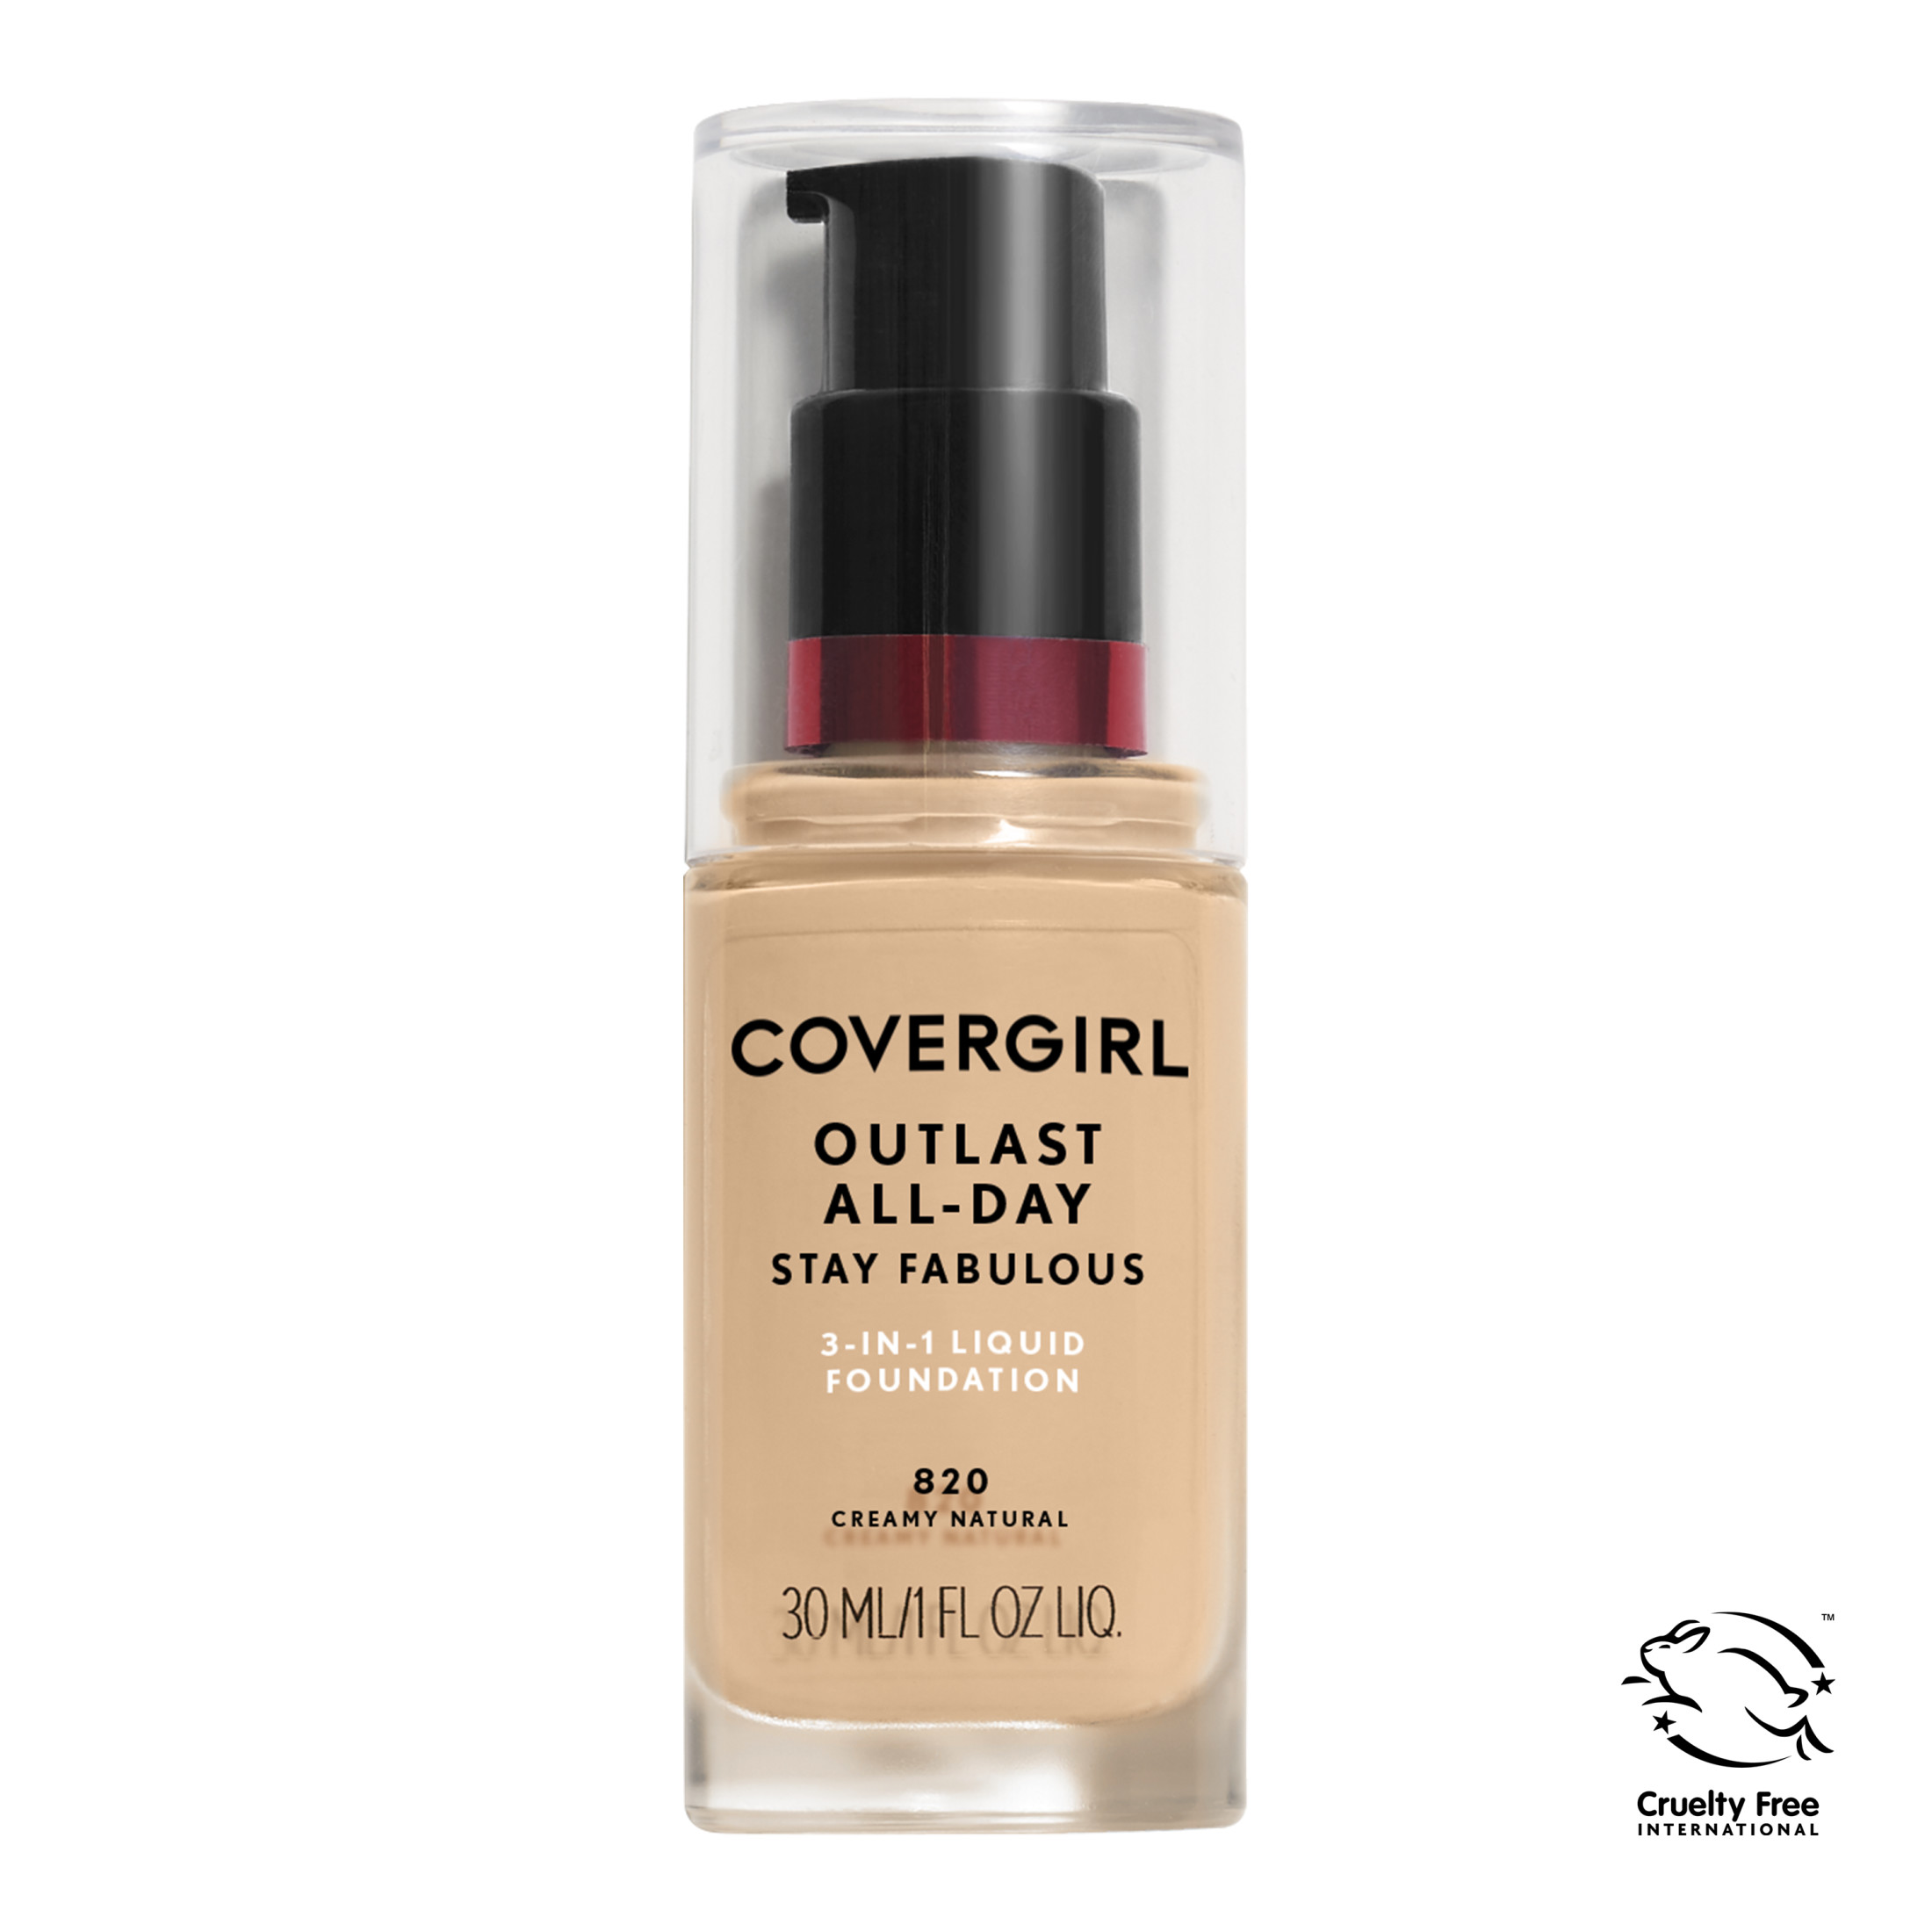 COVERGIRL Outlast All-Day Stay Fabulous 3-in-1 Foundation, 850 Creamy Beige - image 1 of 6